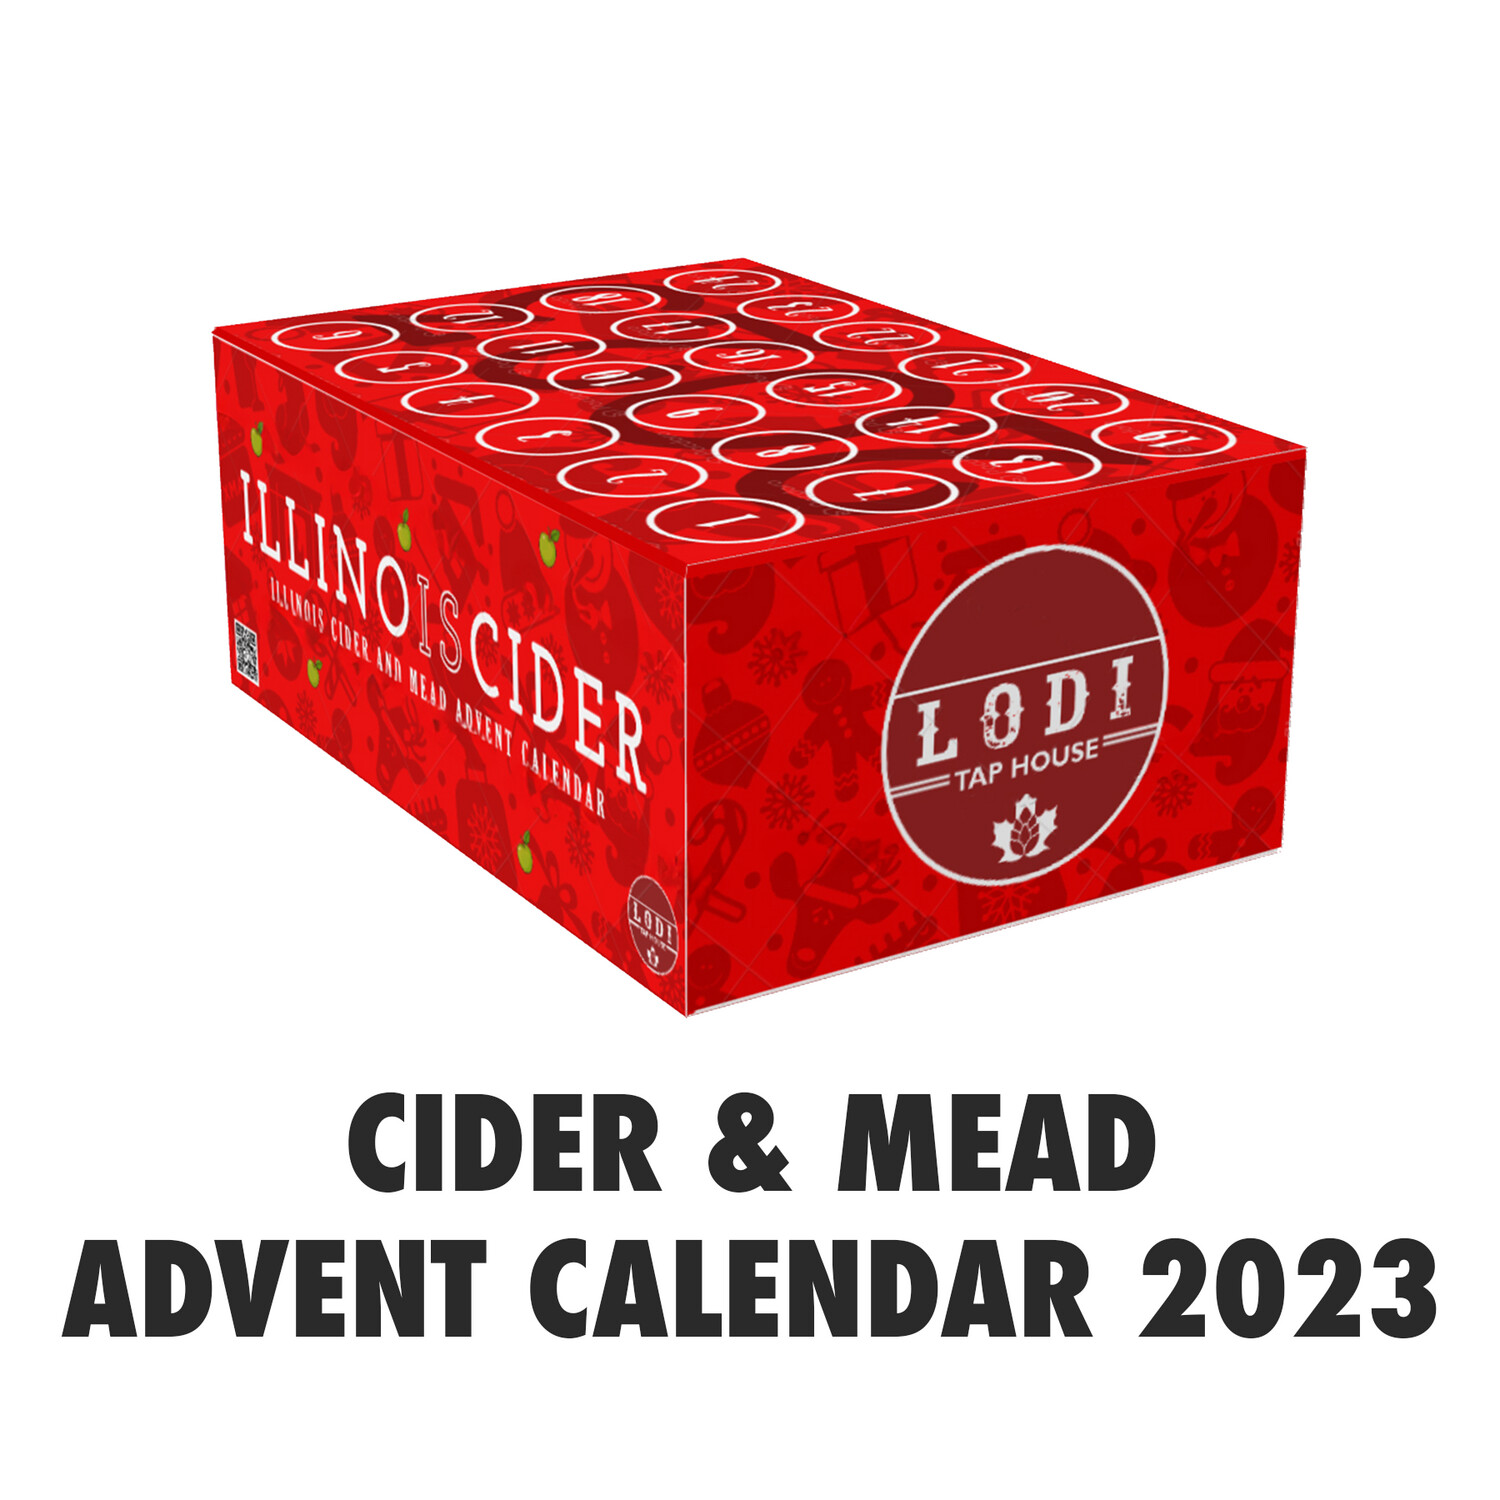 Cider & Mead Advent Calendar 2023 by Lodi Tap House